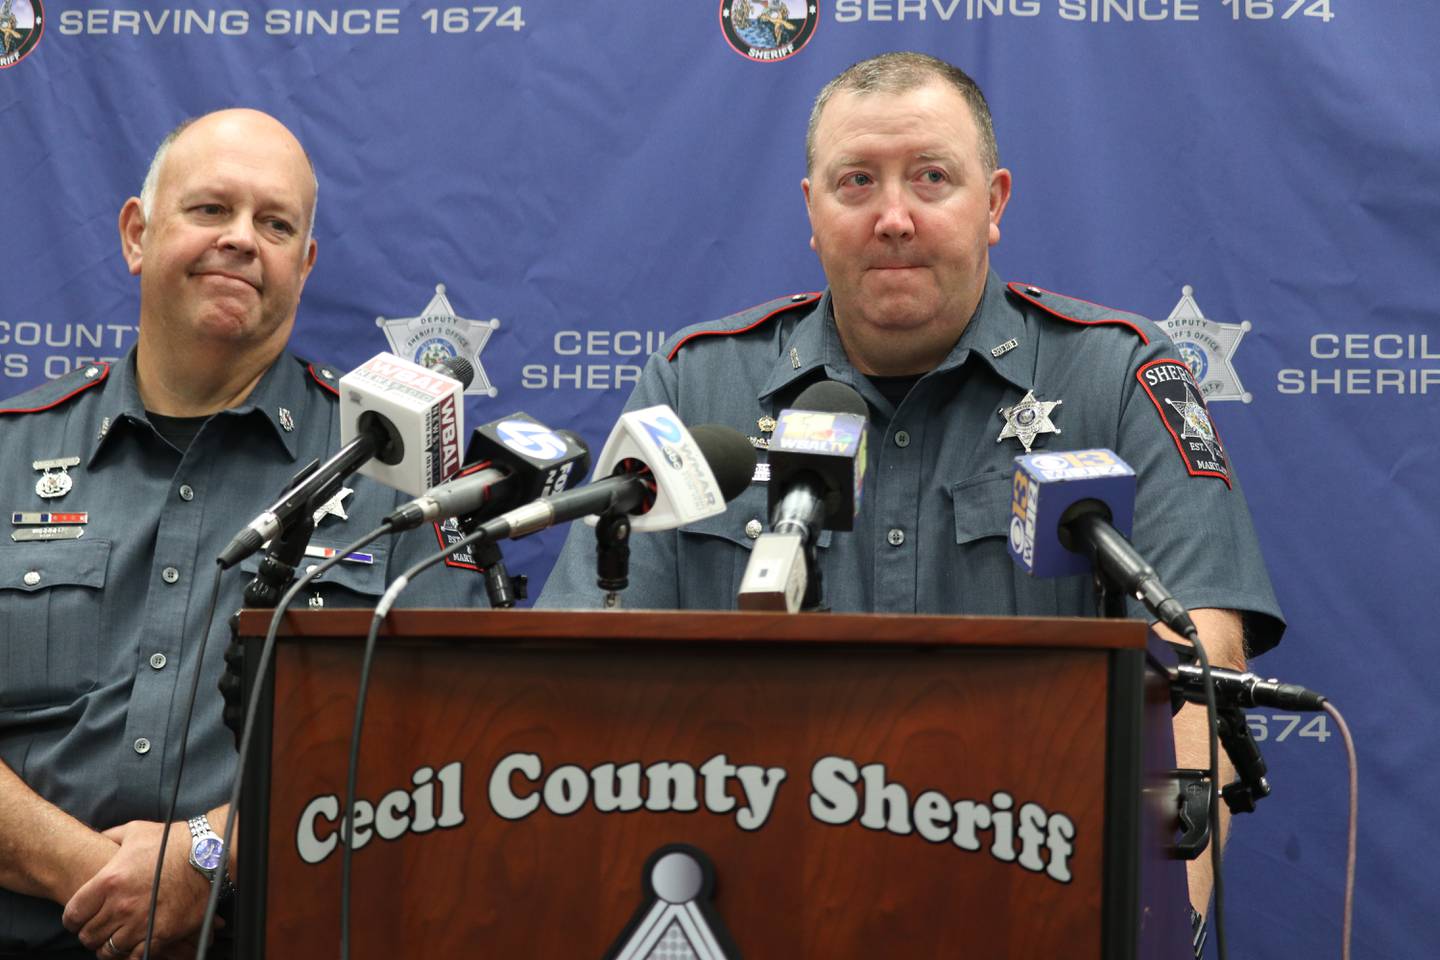 Cecil County Sheriff Scott Adams speaks at a news conference on Friday, Sept. 9, 2022 in Elkton, Md., about five people, including three children, who were found dead with gunshot wounds at a home in Elk Mills, Md., earlier in the day. Chief Deputy Gerald Widdoes is standing left.